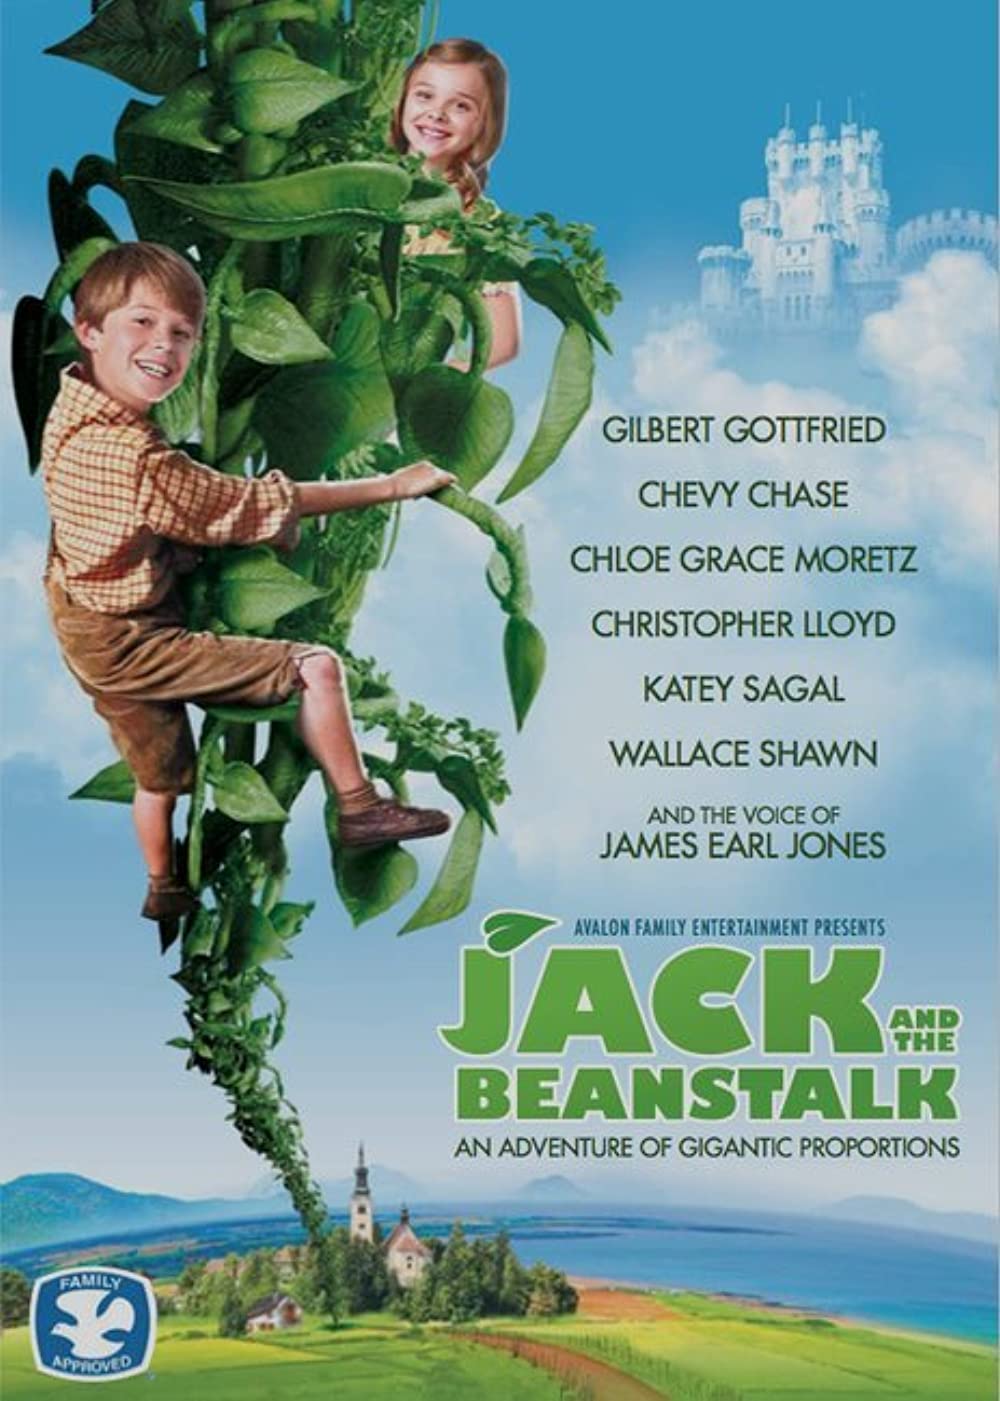 Download Jack and the Beanstalk Movie | Download Jack And The Beanstalk Hd, Dvd